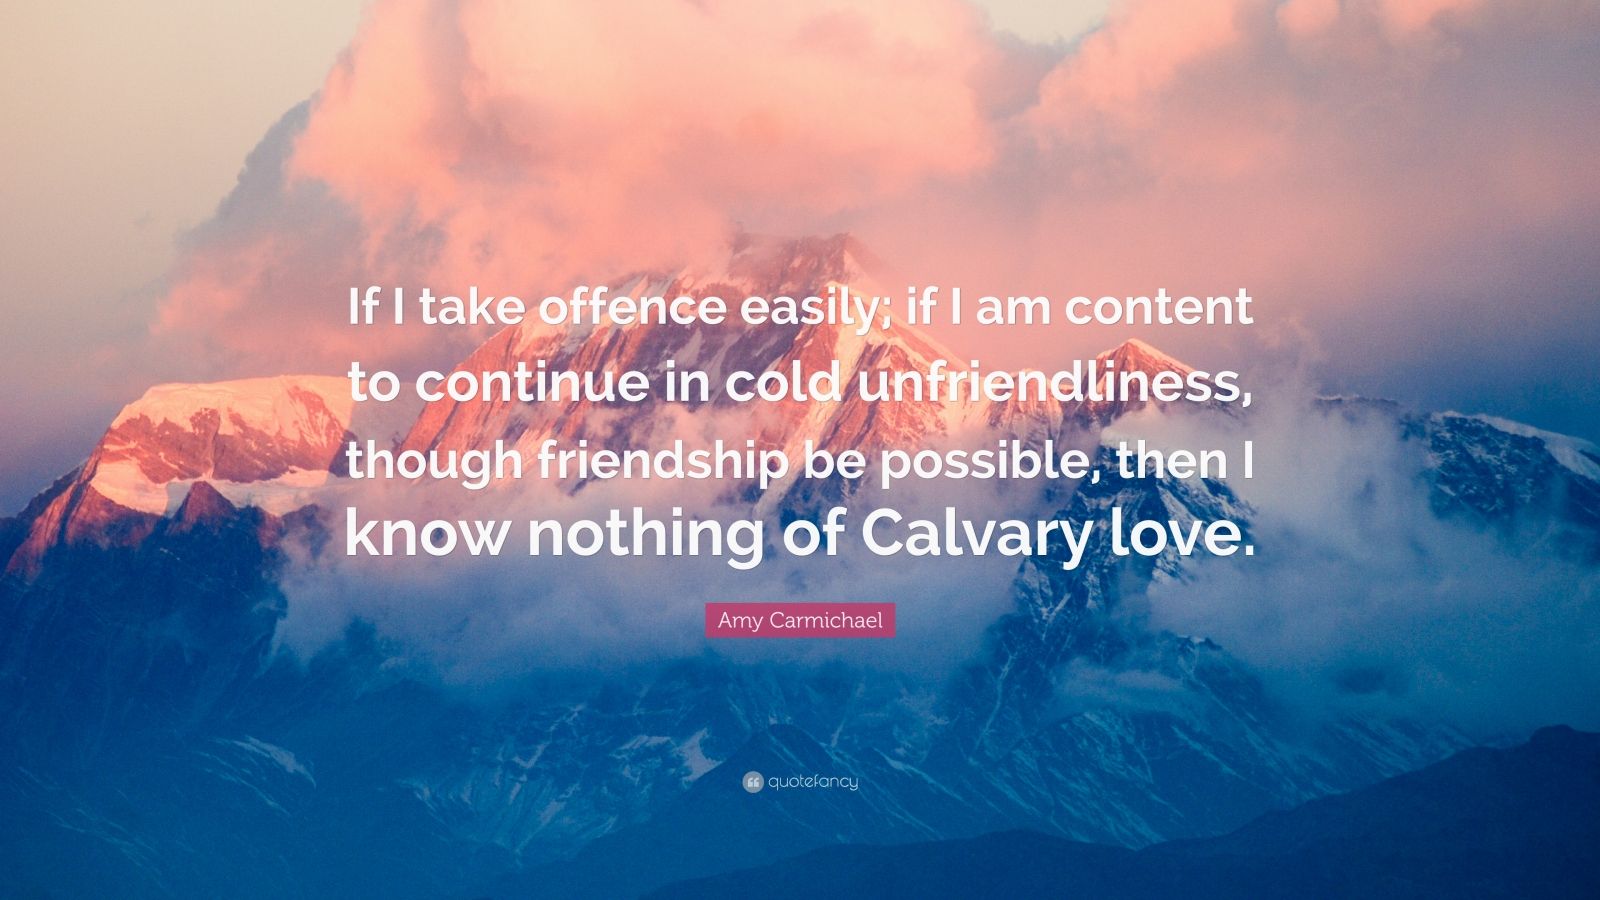 Amy Carmichael Quote “If I take offence easily; if I am